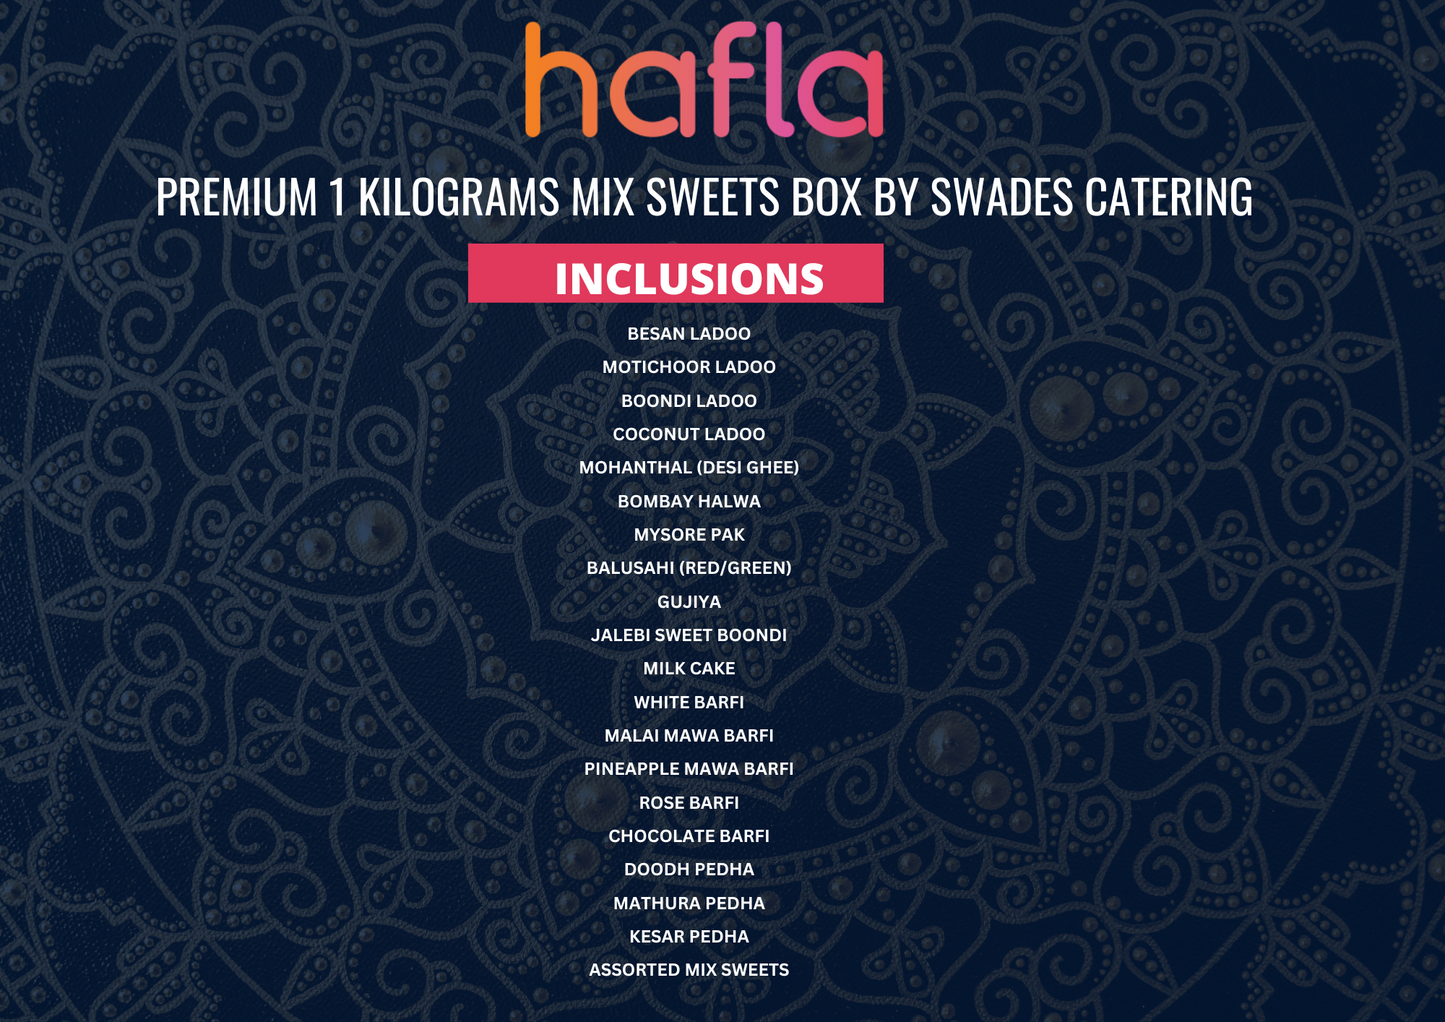 Premium Mix Sweets Box by Swades Catering